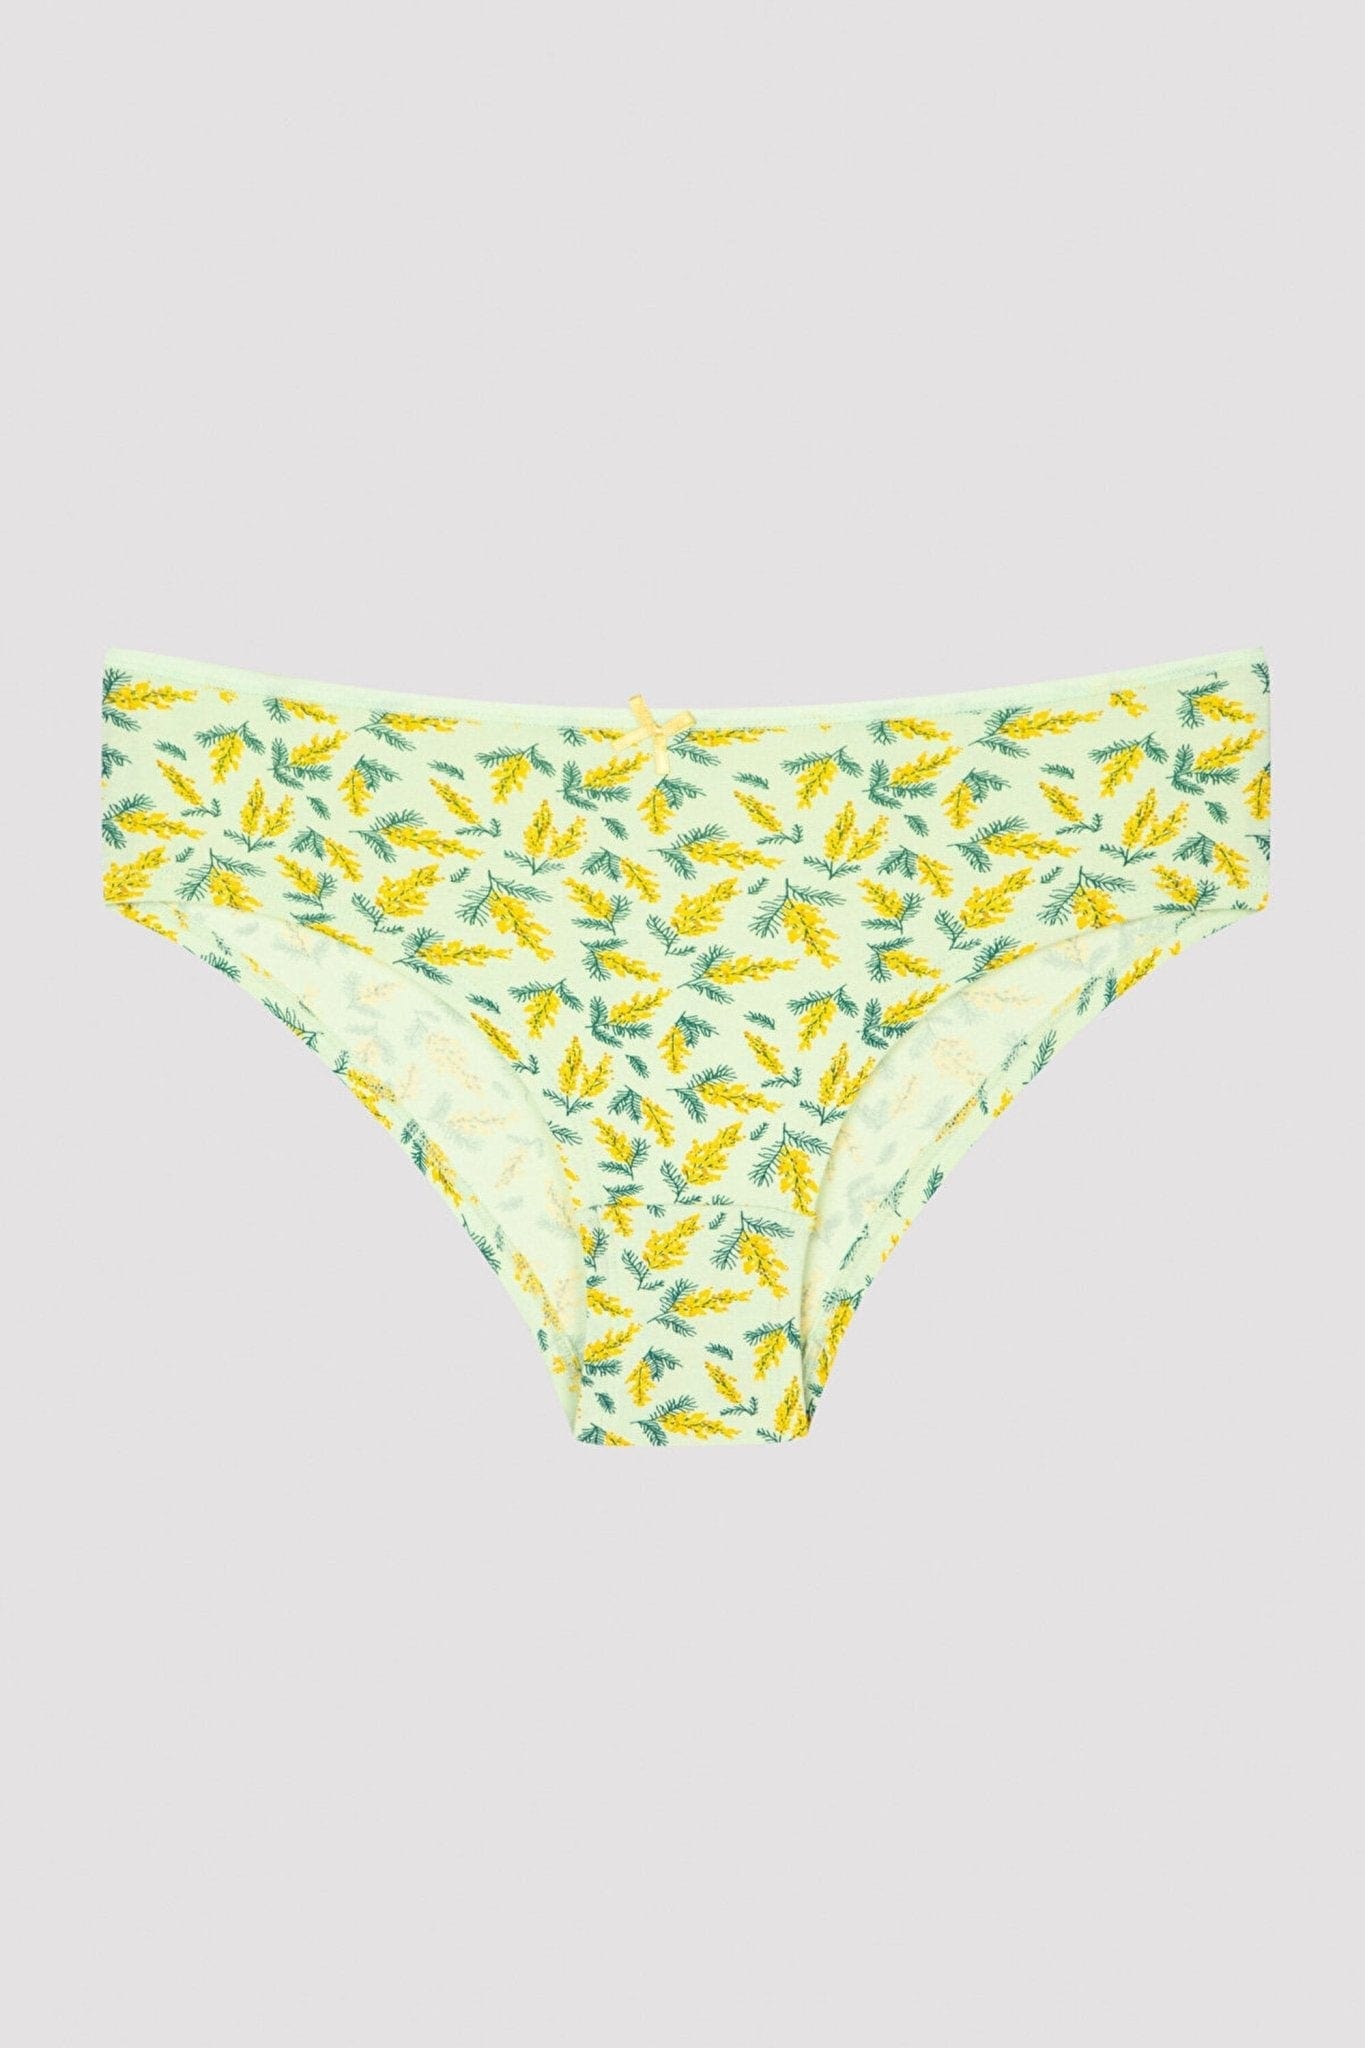 Mimosa Patterned 5-Piece Hipster Panties FLEXISB